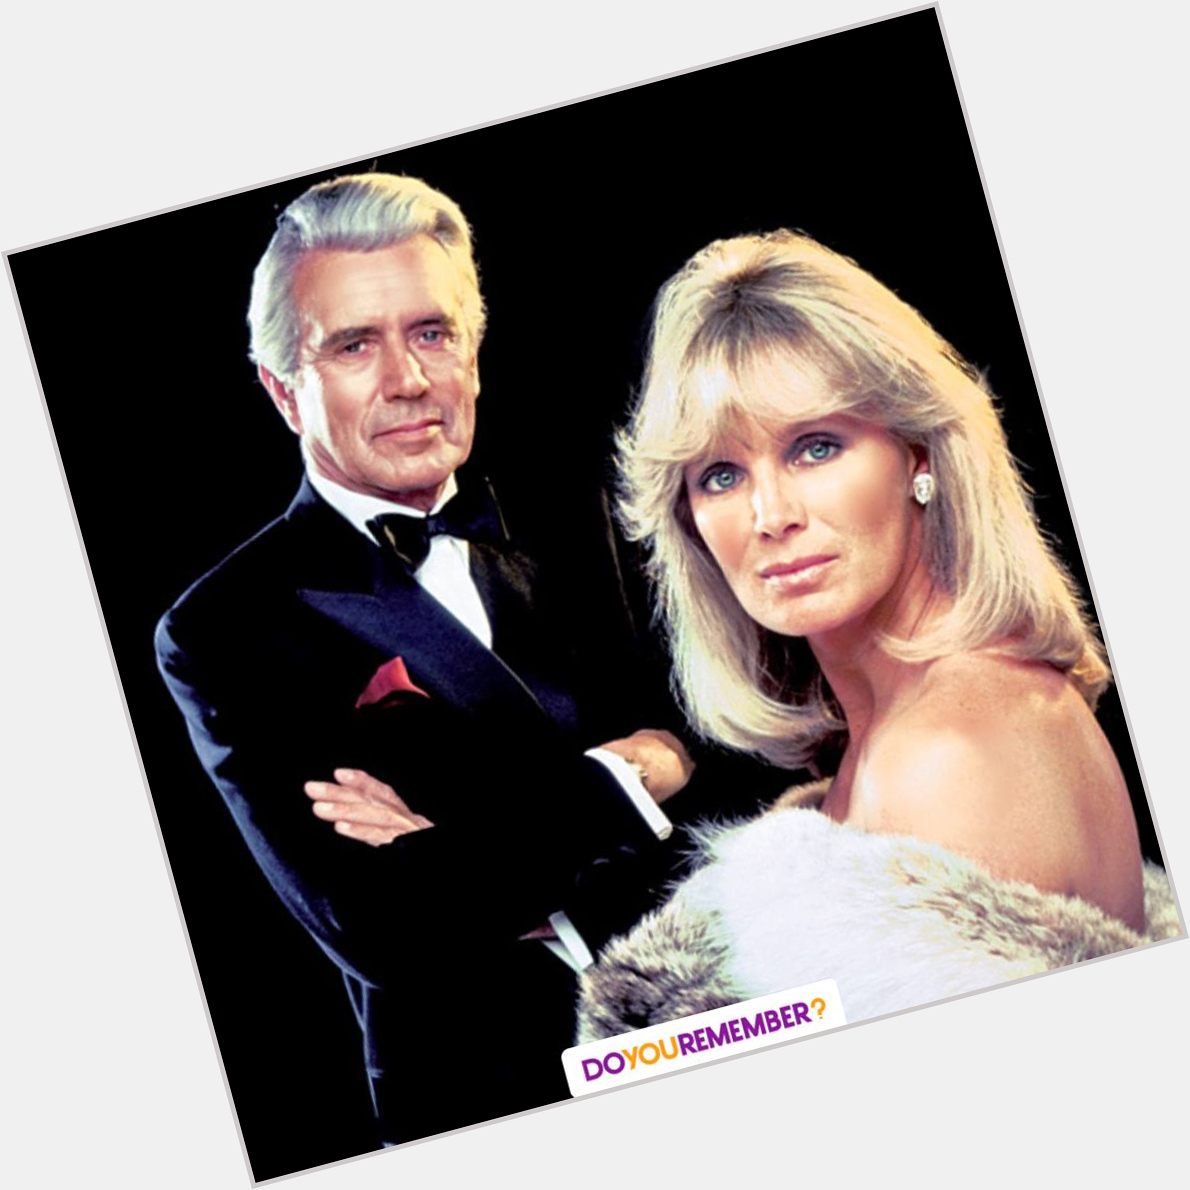 Happy 78th birthday to actress Linda Evans! 

Remember her as Krystle Carrington on Dynasty? 